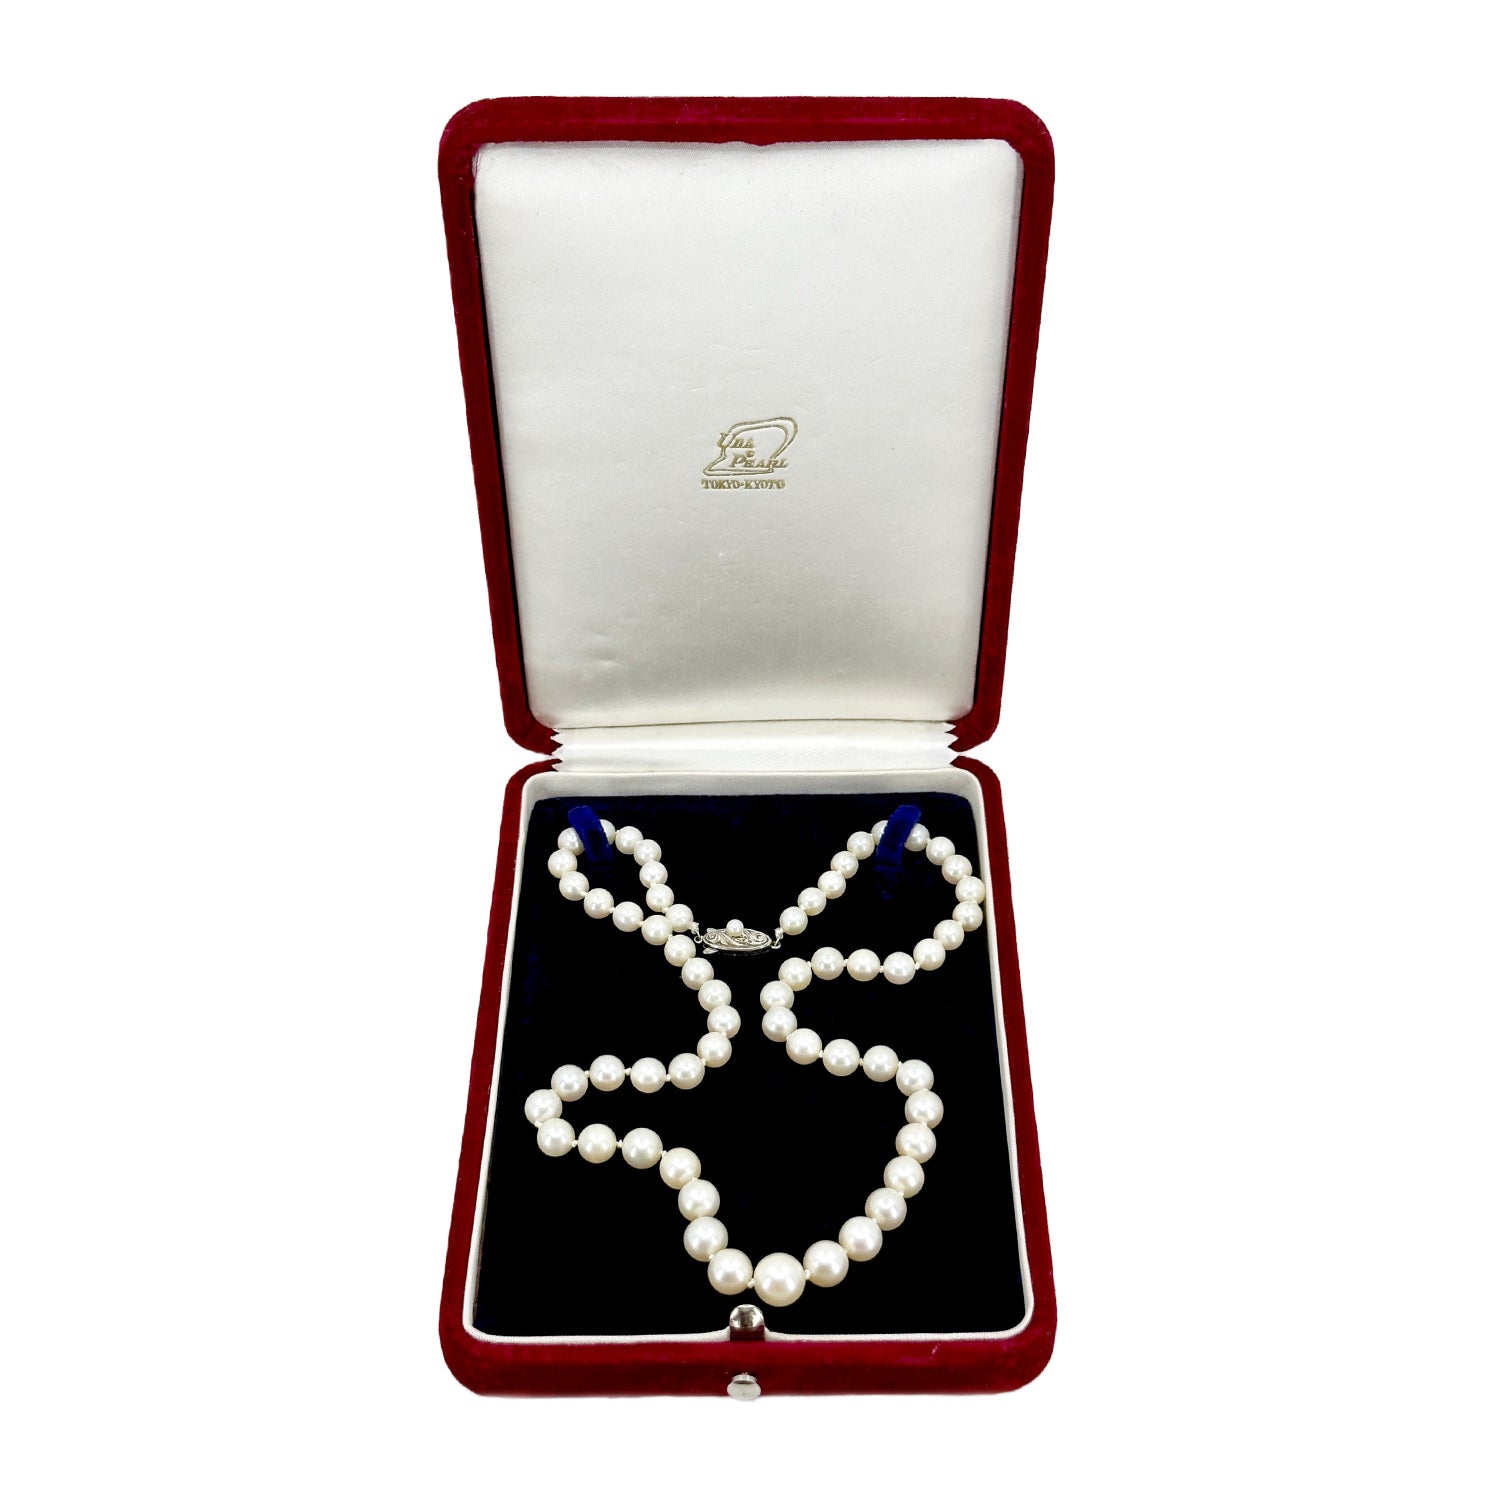 Una Pearl Designer Vintage Japanese Cultured Akoya Pearl Strand Necklace Box- Sterling Silver 18 Inch